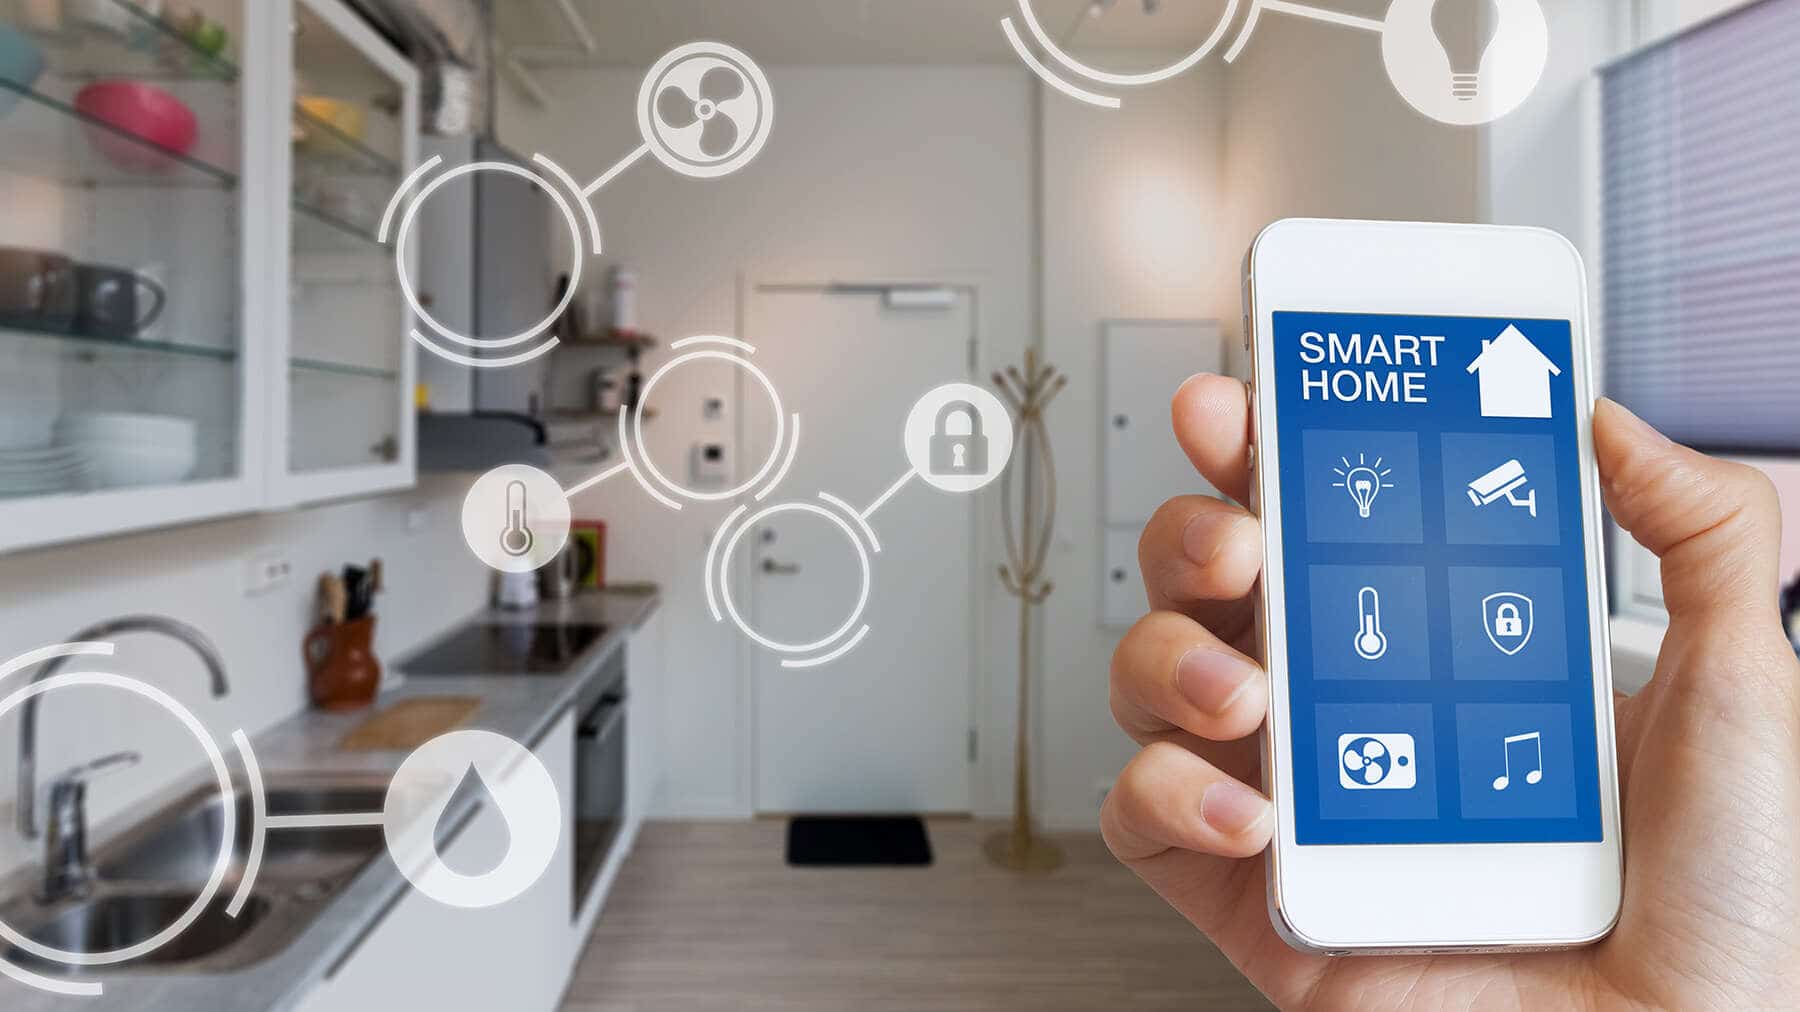 Smart home connectivity